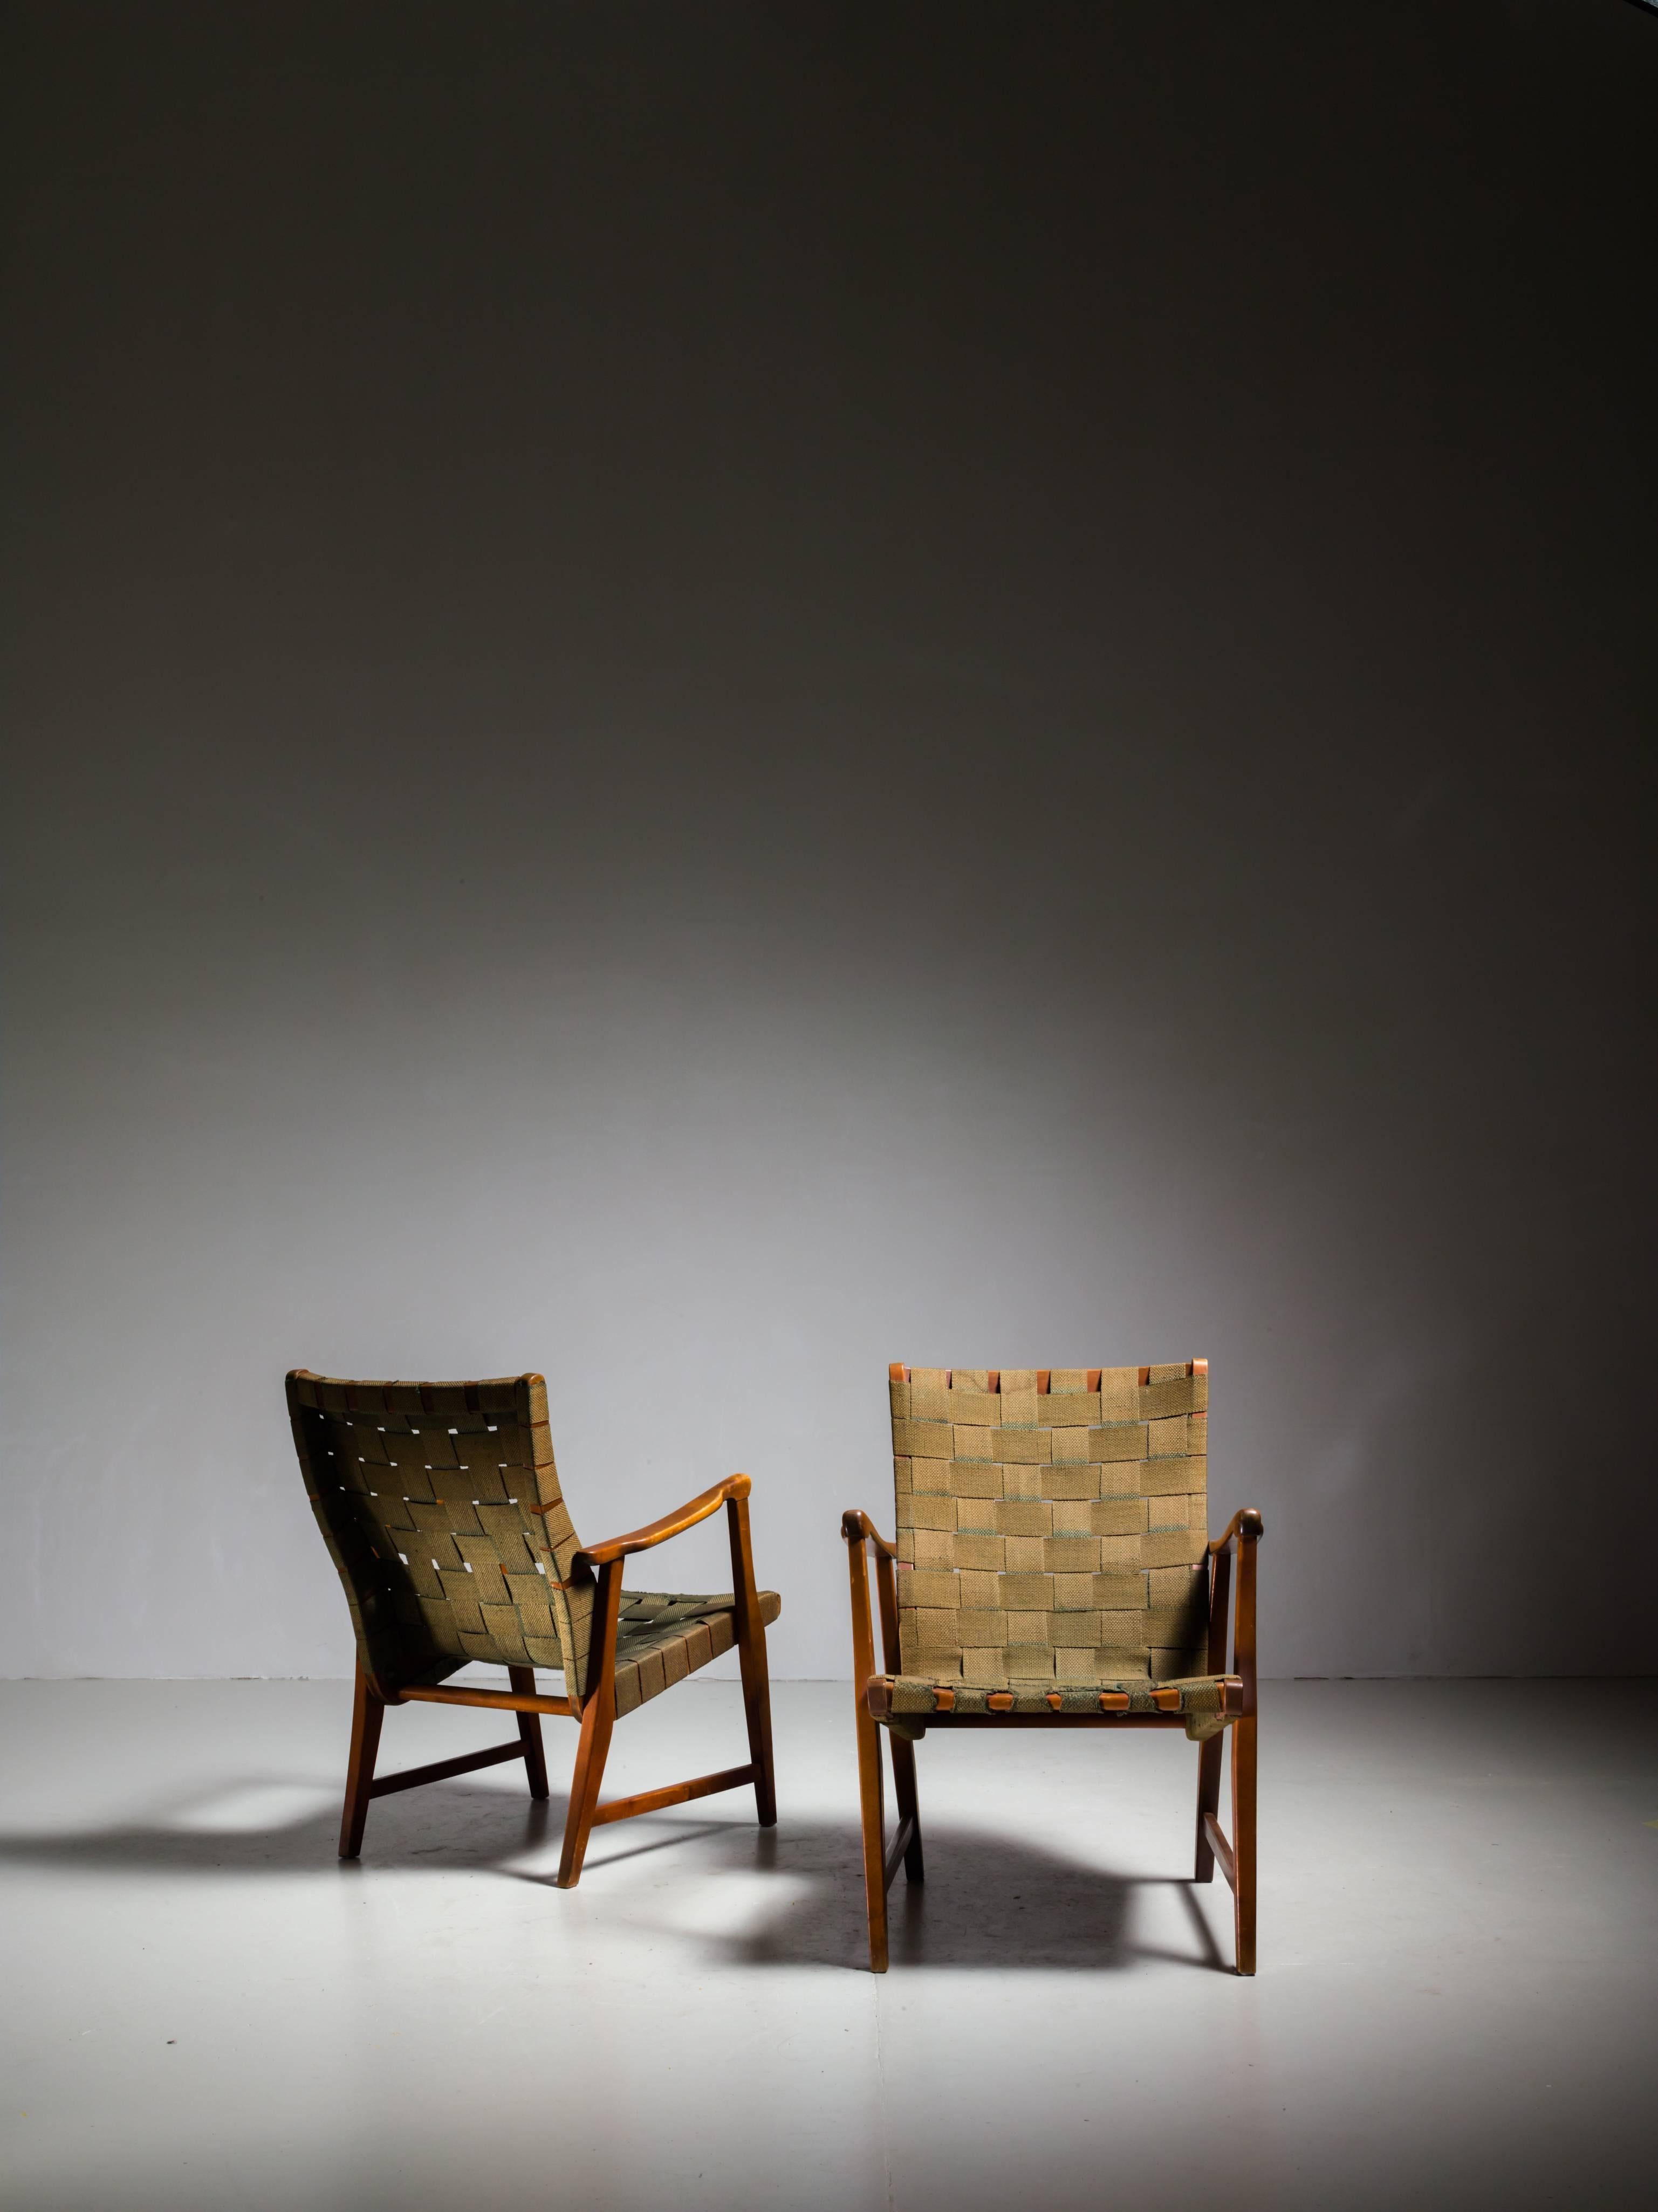 A pair of armchairs by Nordiska Kompaniet, made of a stained beech frame and a webbed dark green canvas seating.
The chairs are attributed to Elias Svedberg and still have the metal Nordiska tags.

The webbing shows wear at the edge of the